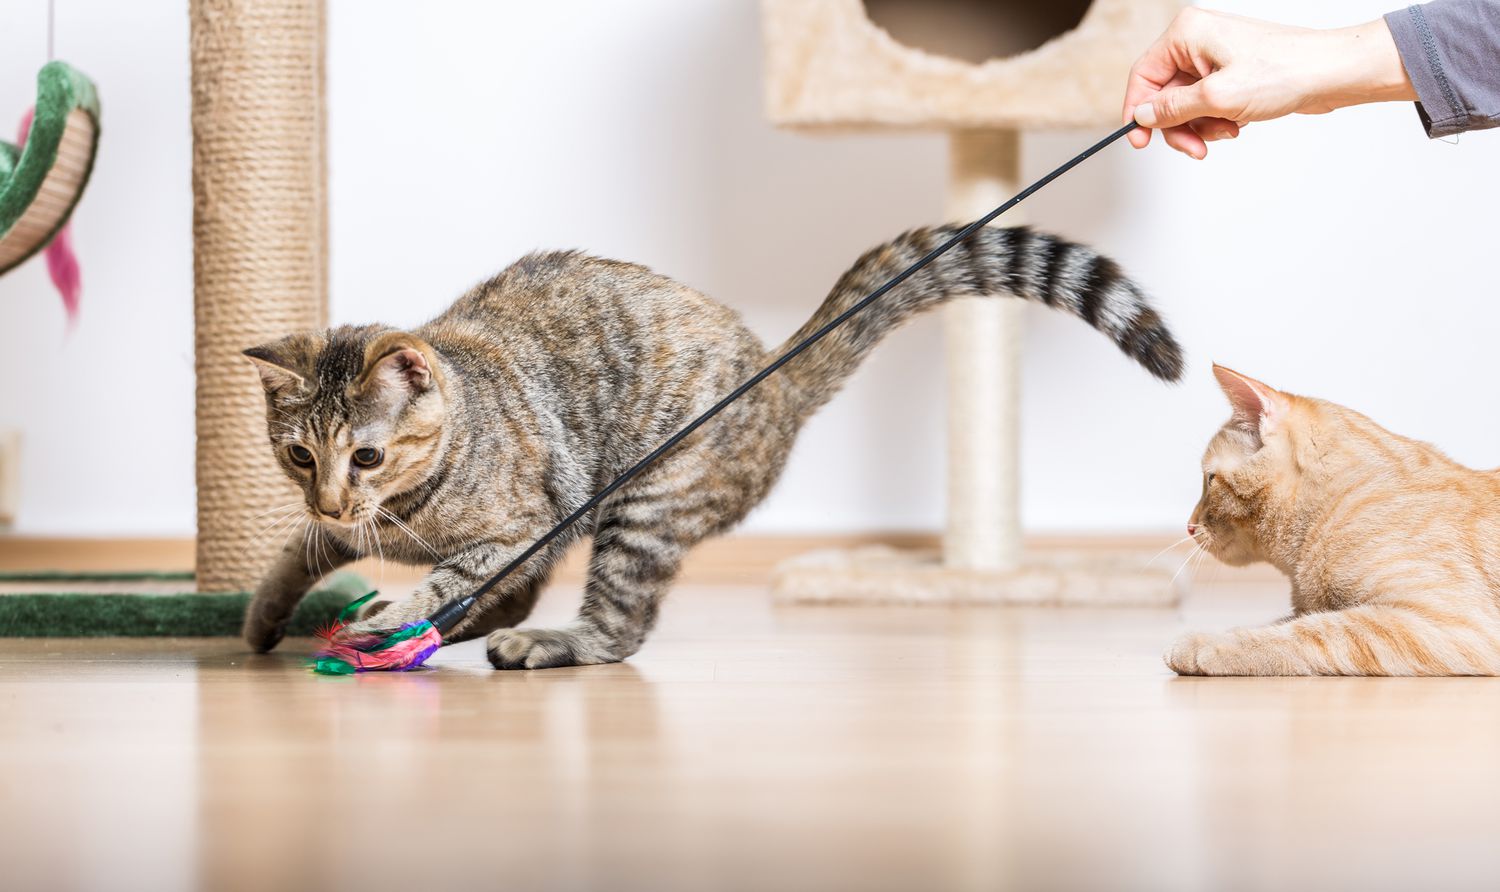 The Best Cat Toys, According to Our Favorite Felines - CNET